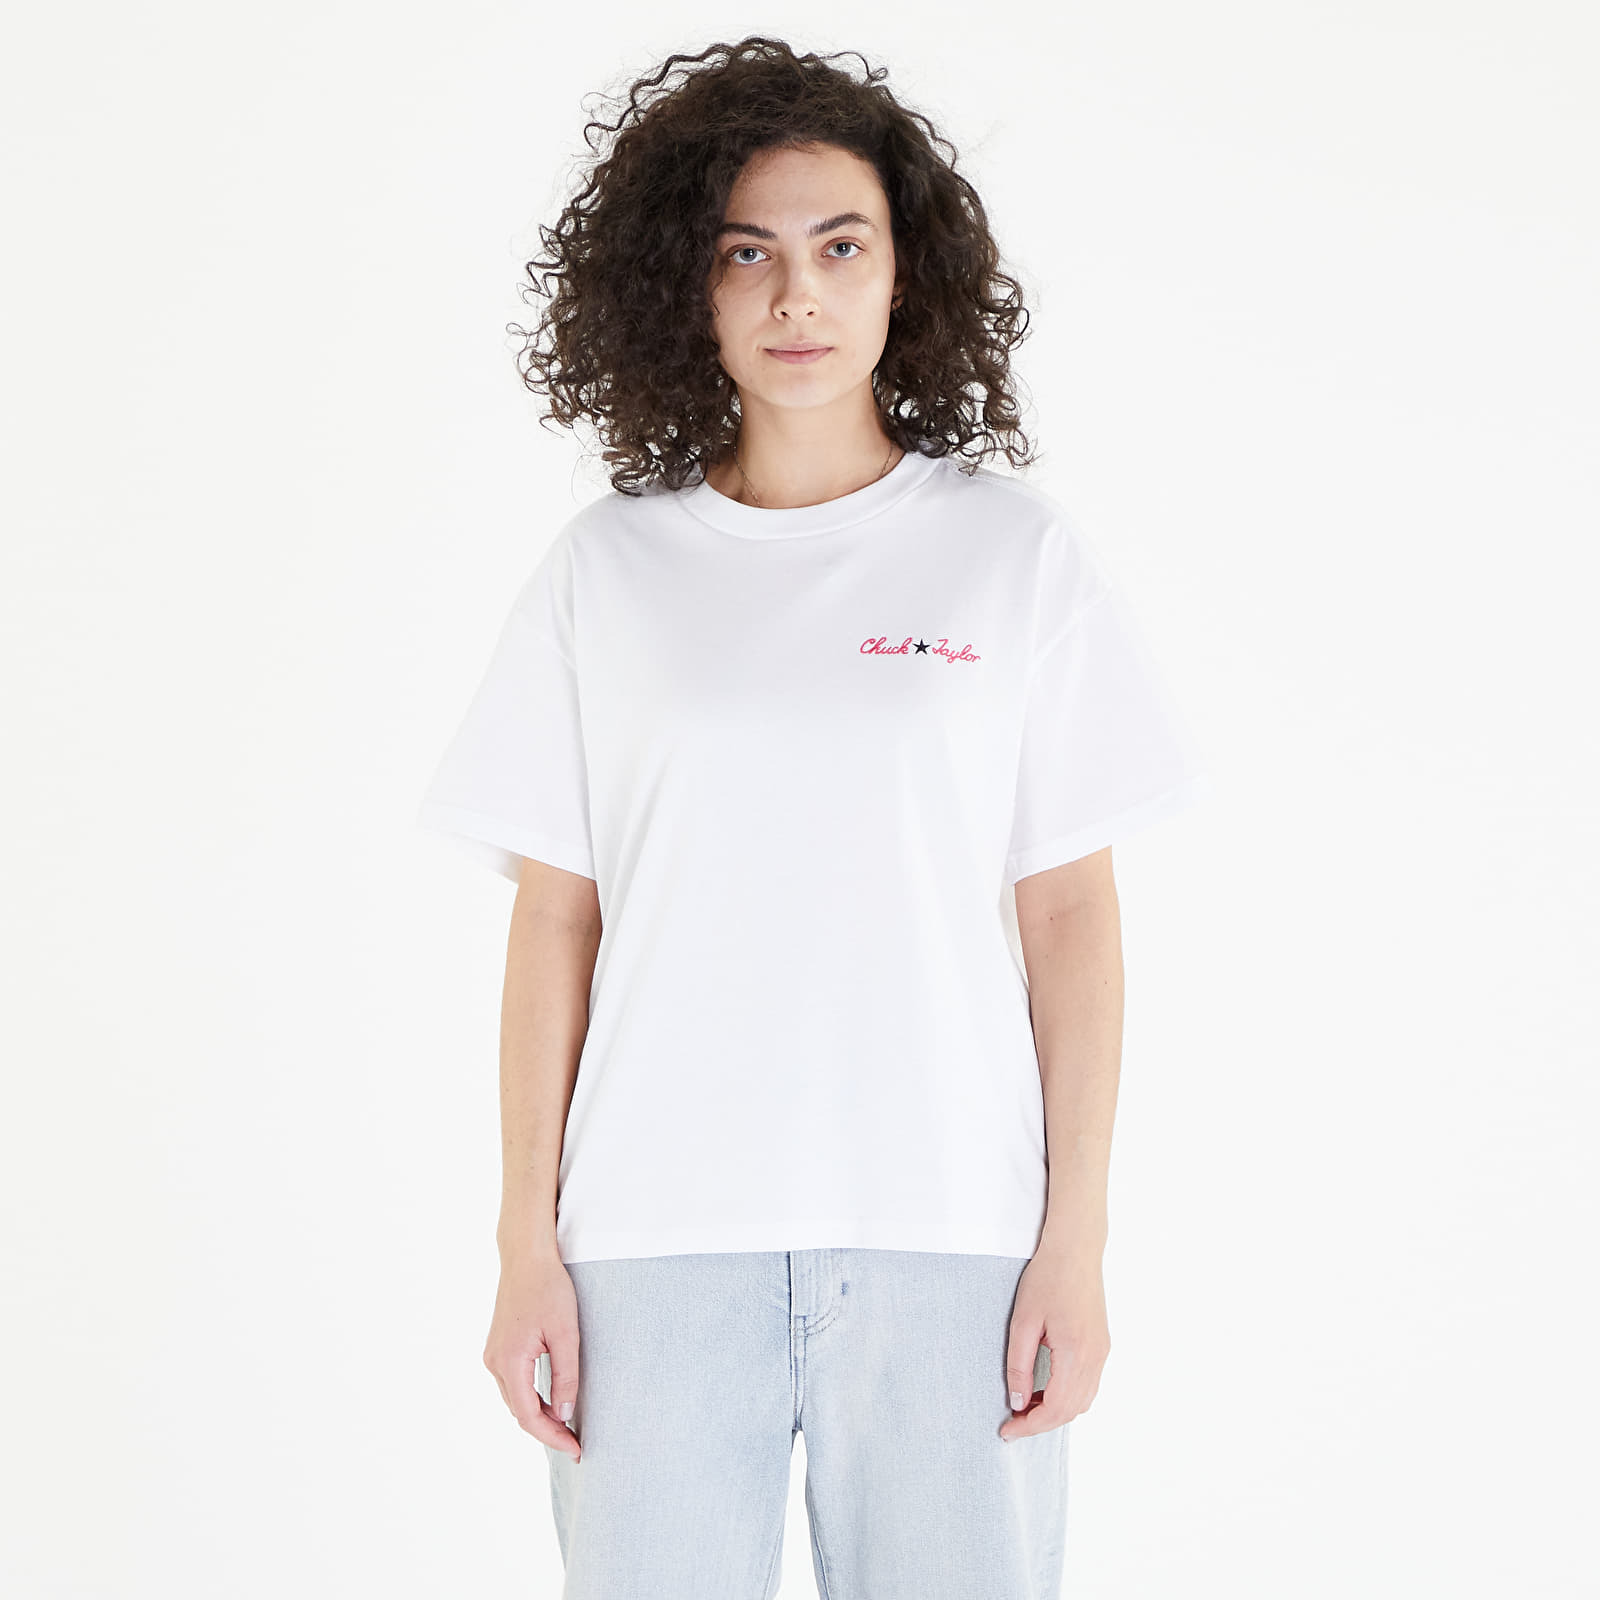 Converse - all star oversized tee white